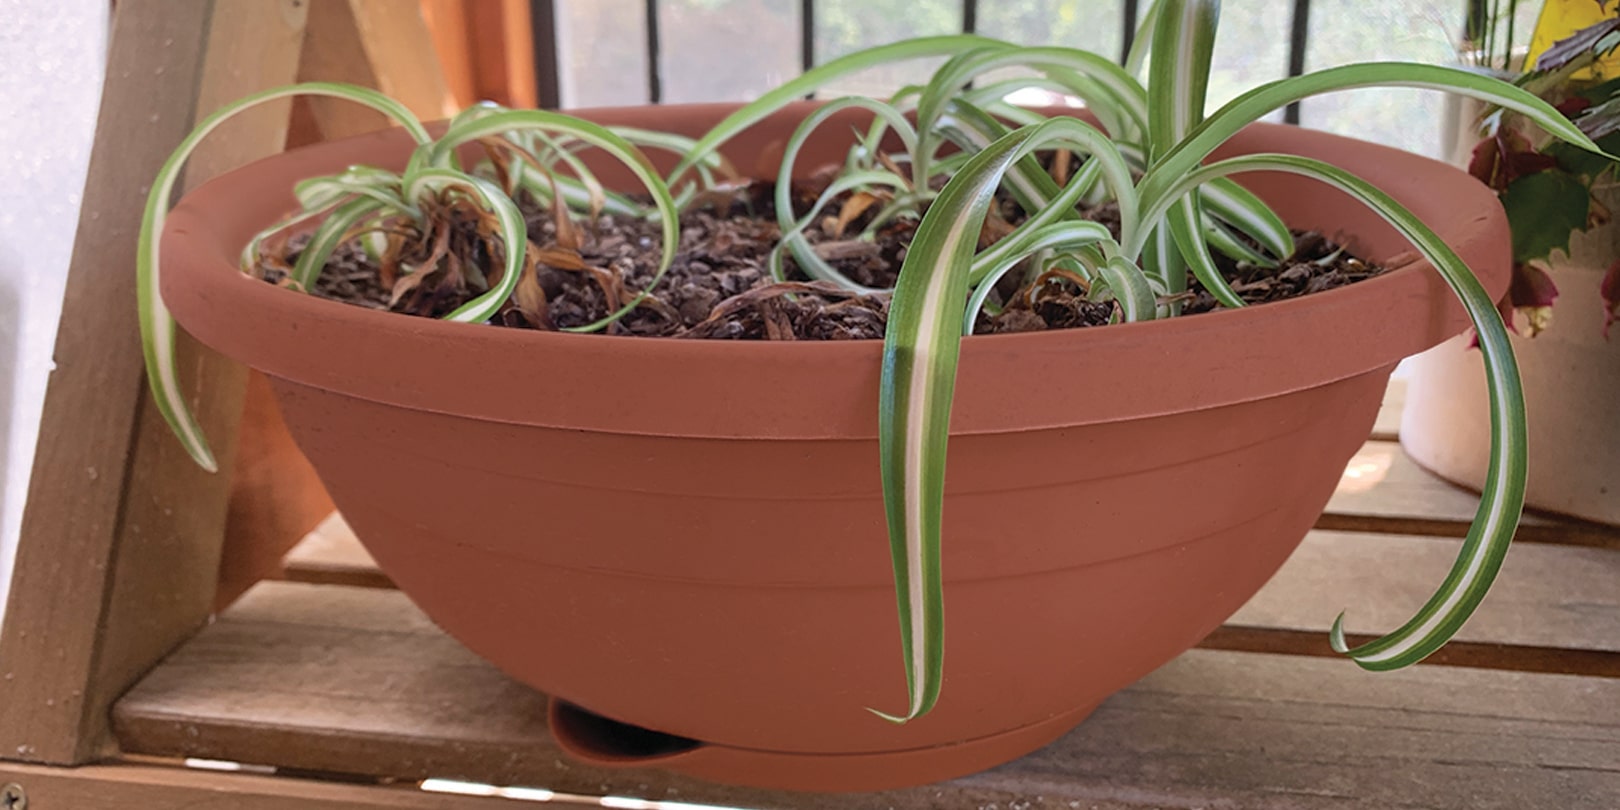 Inspiring Container Gardening Stories – How a Parent With Plants Grew a Plant Parent